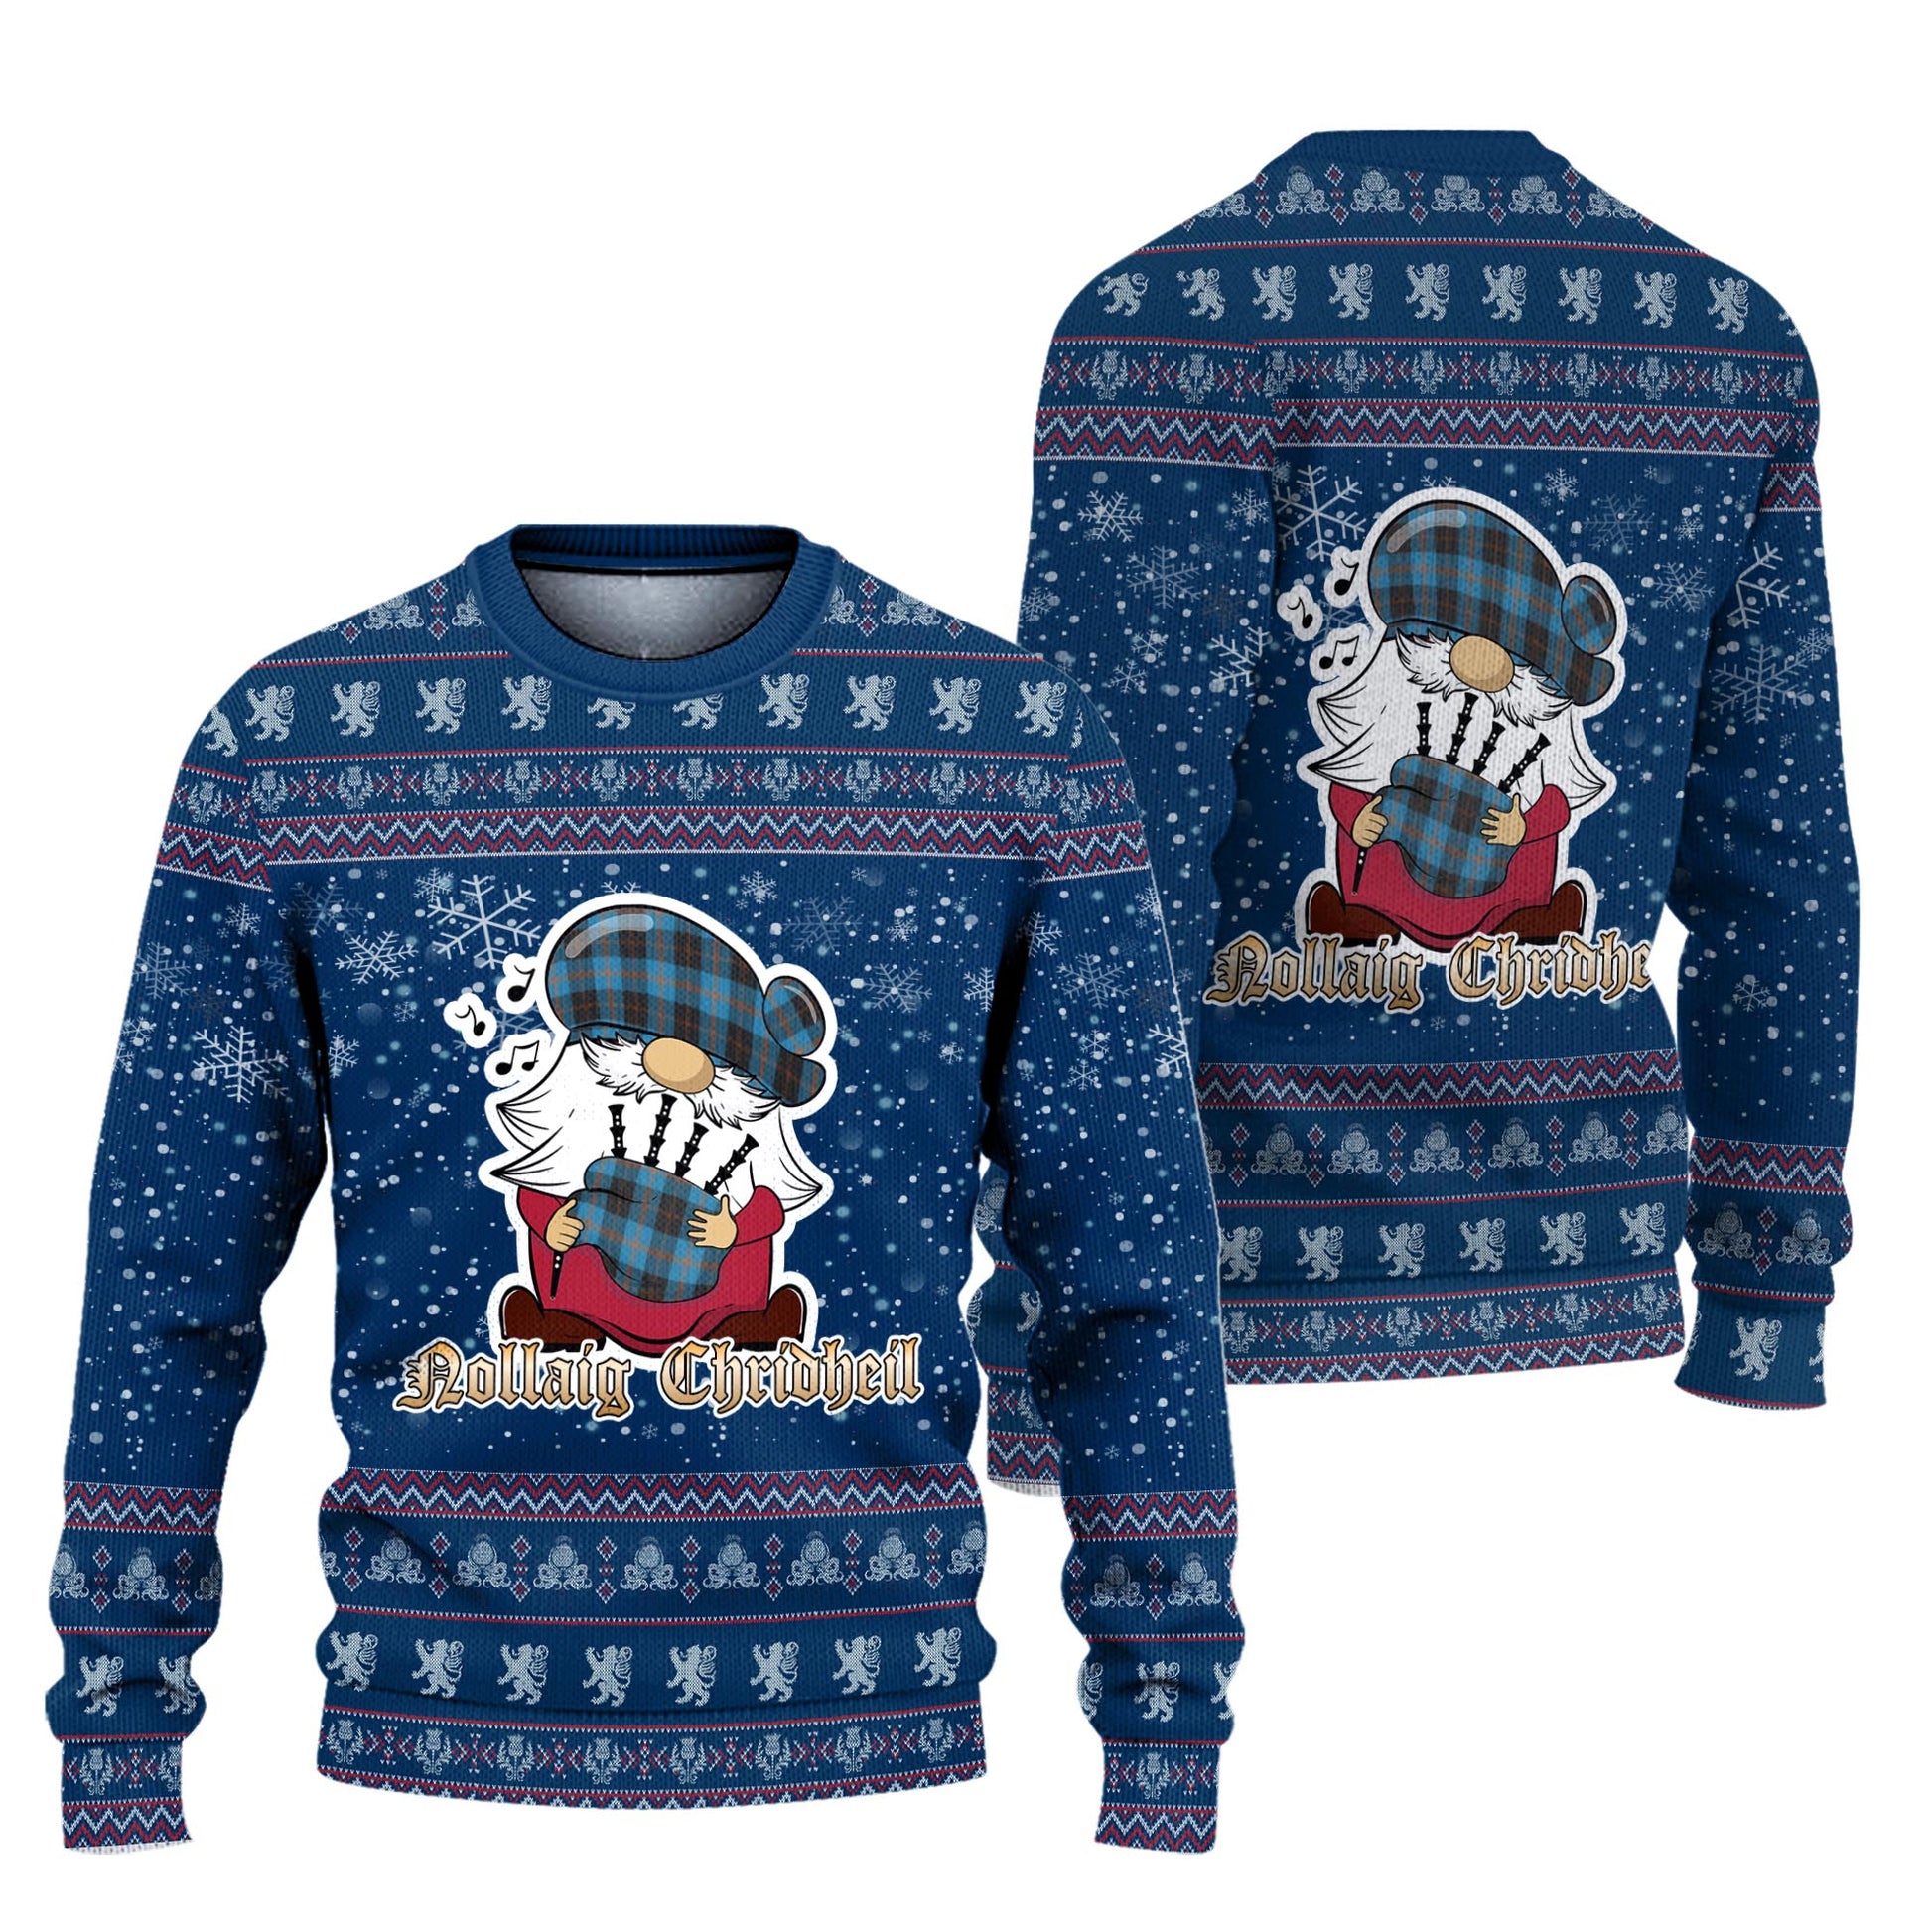 Garden Clan Christmas Family Knitted Sweater with Funny Gnome Playing Bagpipes Unisex Blue - Tartanvibesclothing